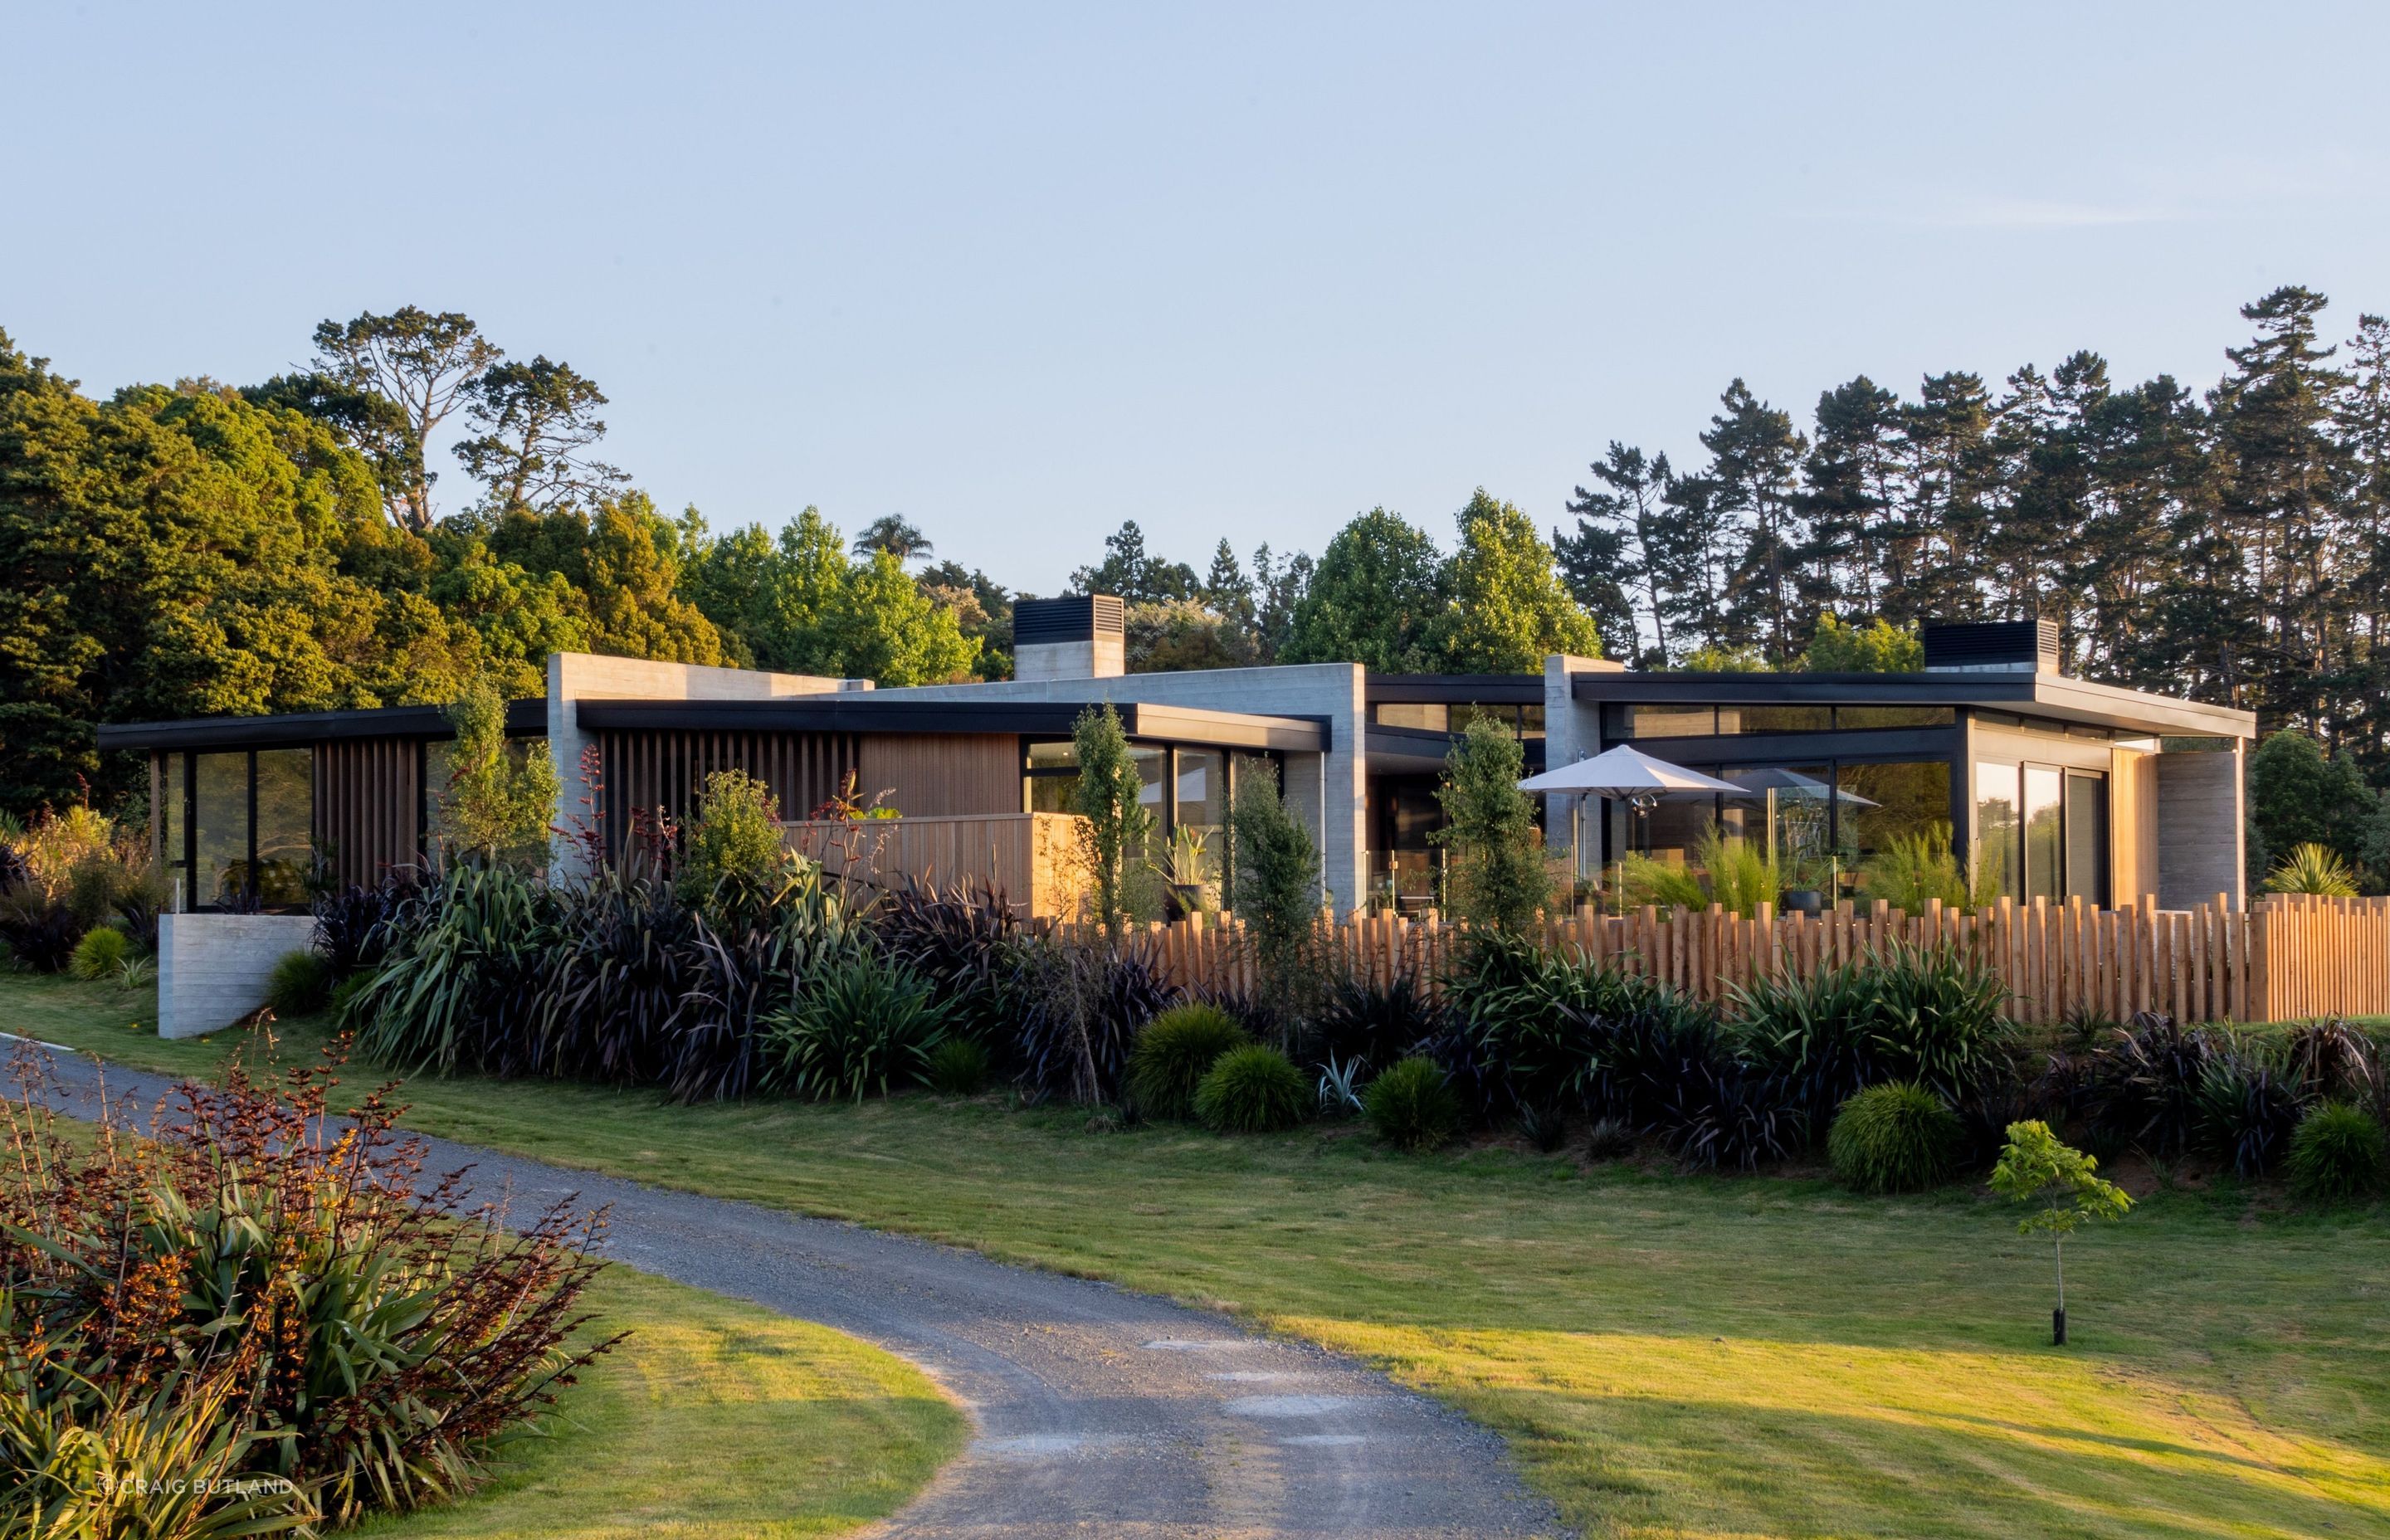 Strong elements of Insitu-concrete contrast with the warmth of Vertical Cedar Cladding in this home which sits within the landscape.